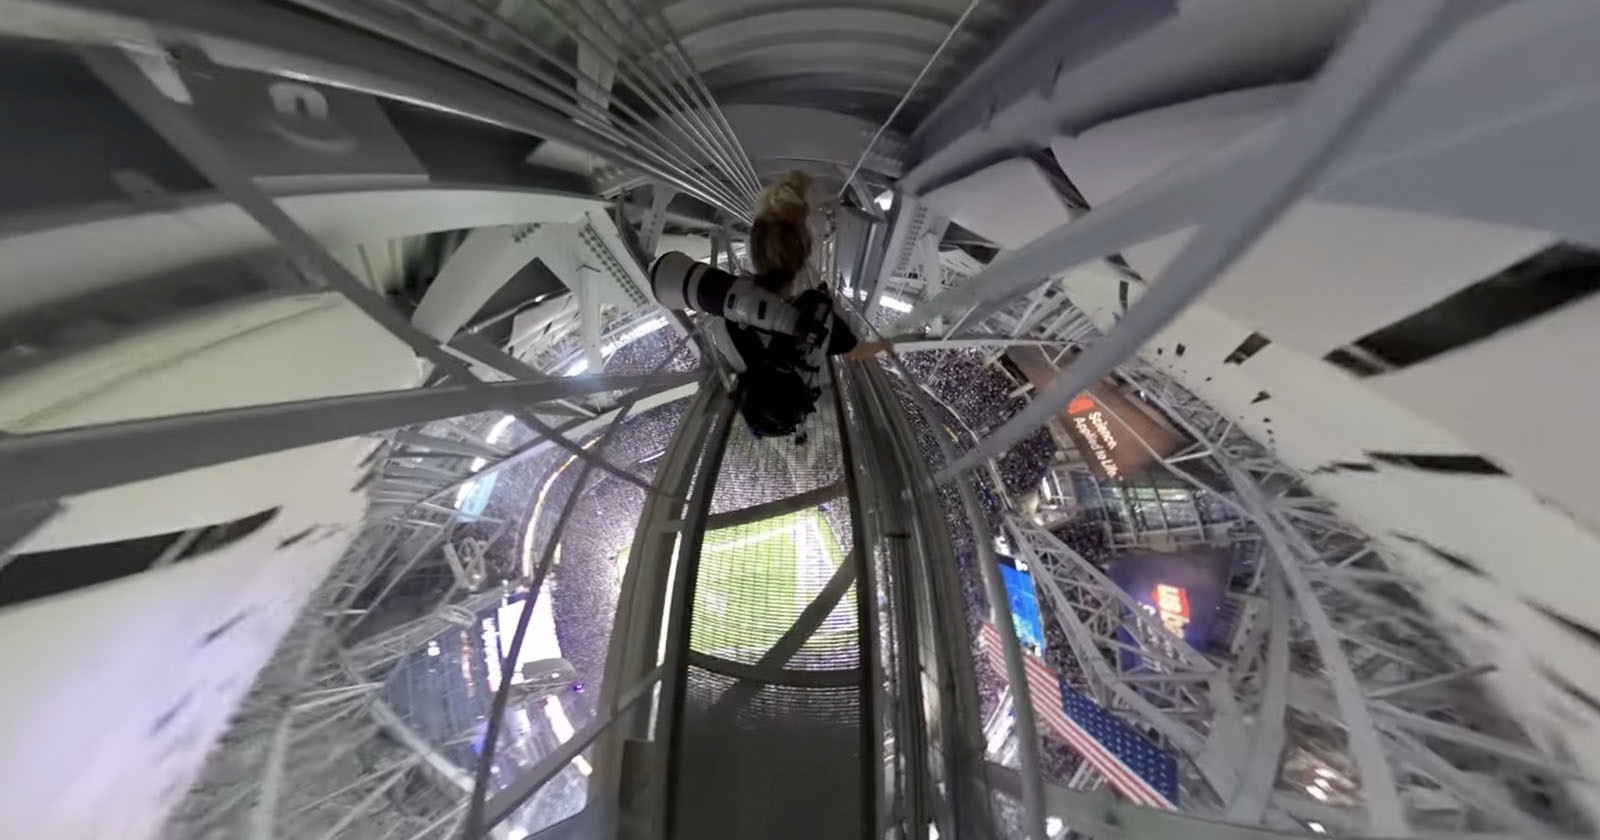  nfl photographer shares dizzying view from stadium catwalk 